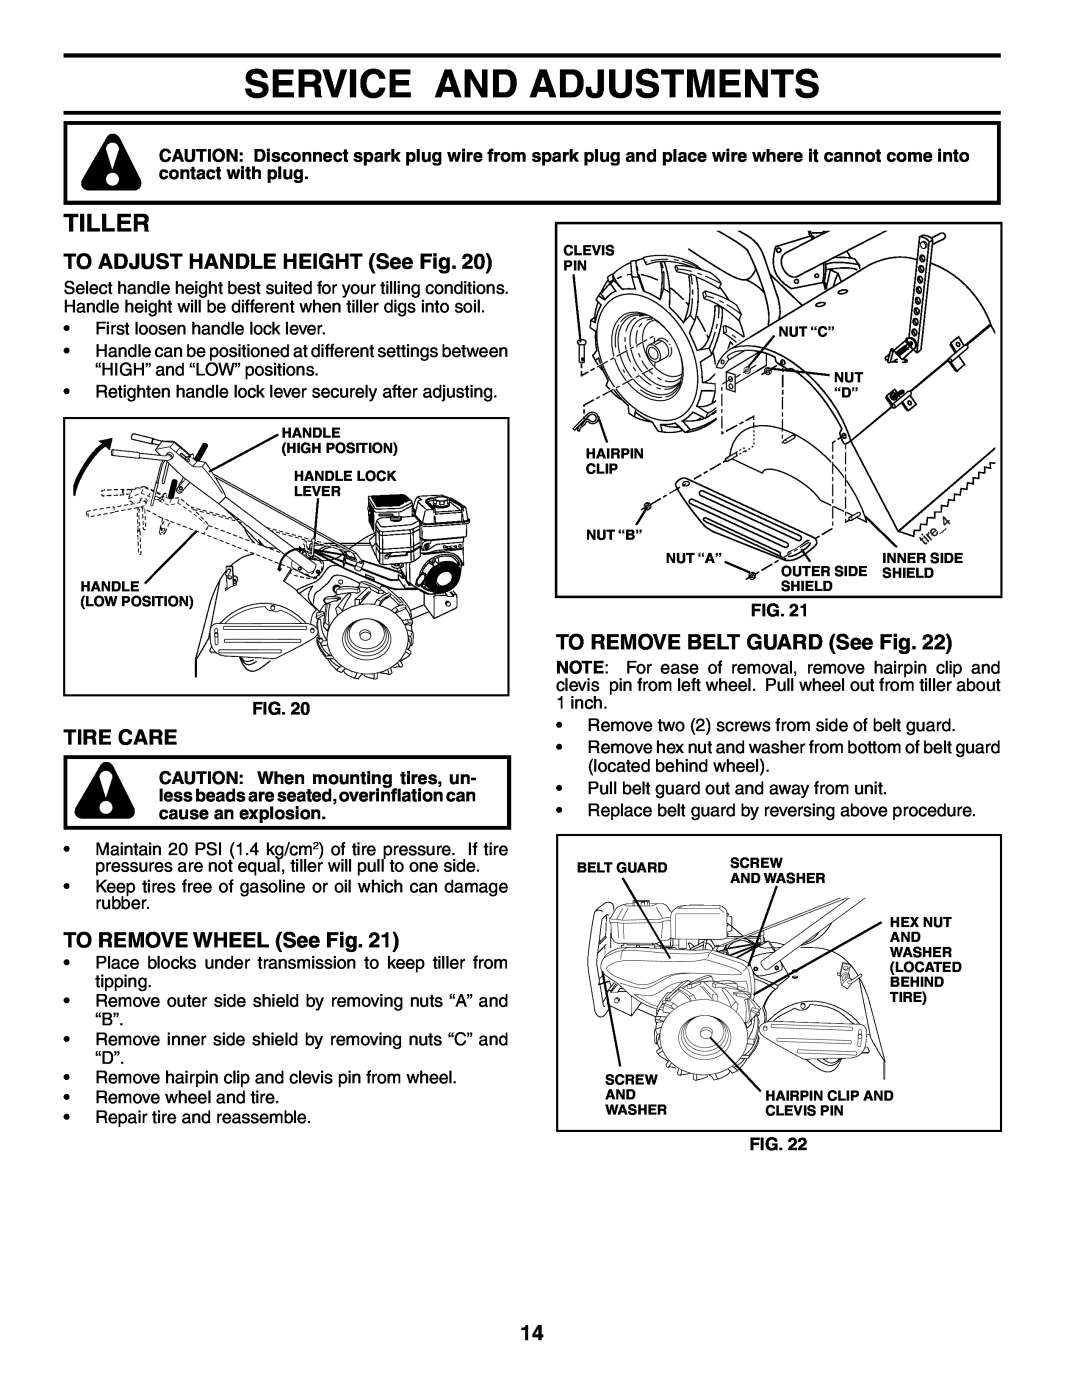 Poulan 188904 Service And Adjustments, Tiller, TO ADJUST HANDLE HEIGHT See Fig, Tire Care, TO REMOVE WHEEL See Fig 